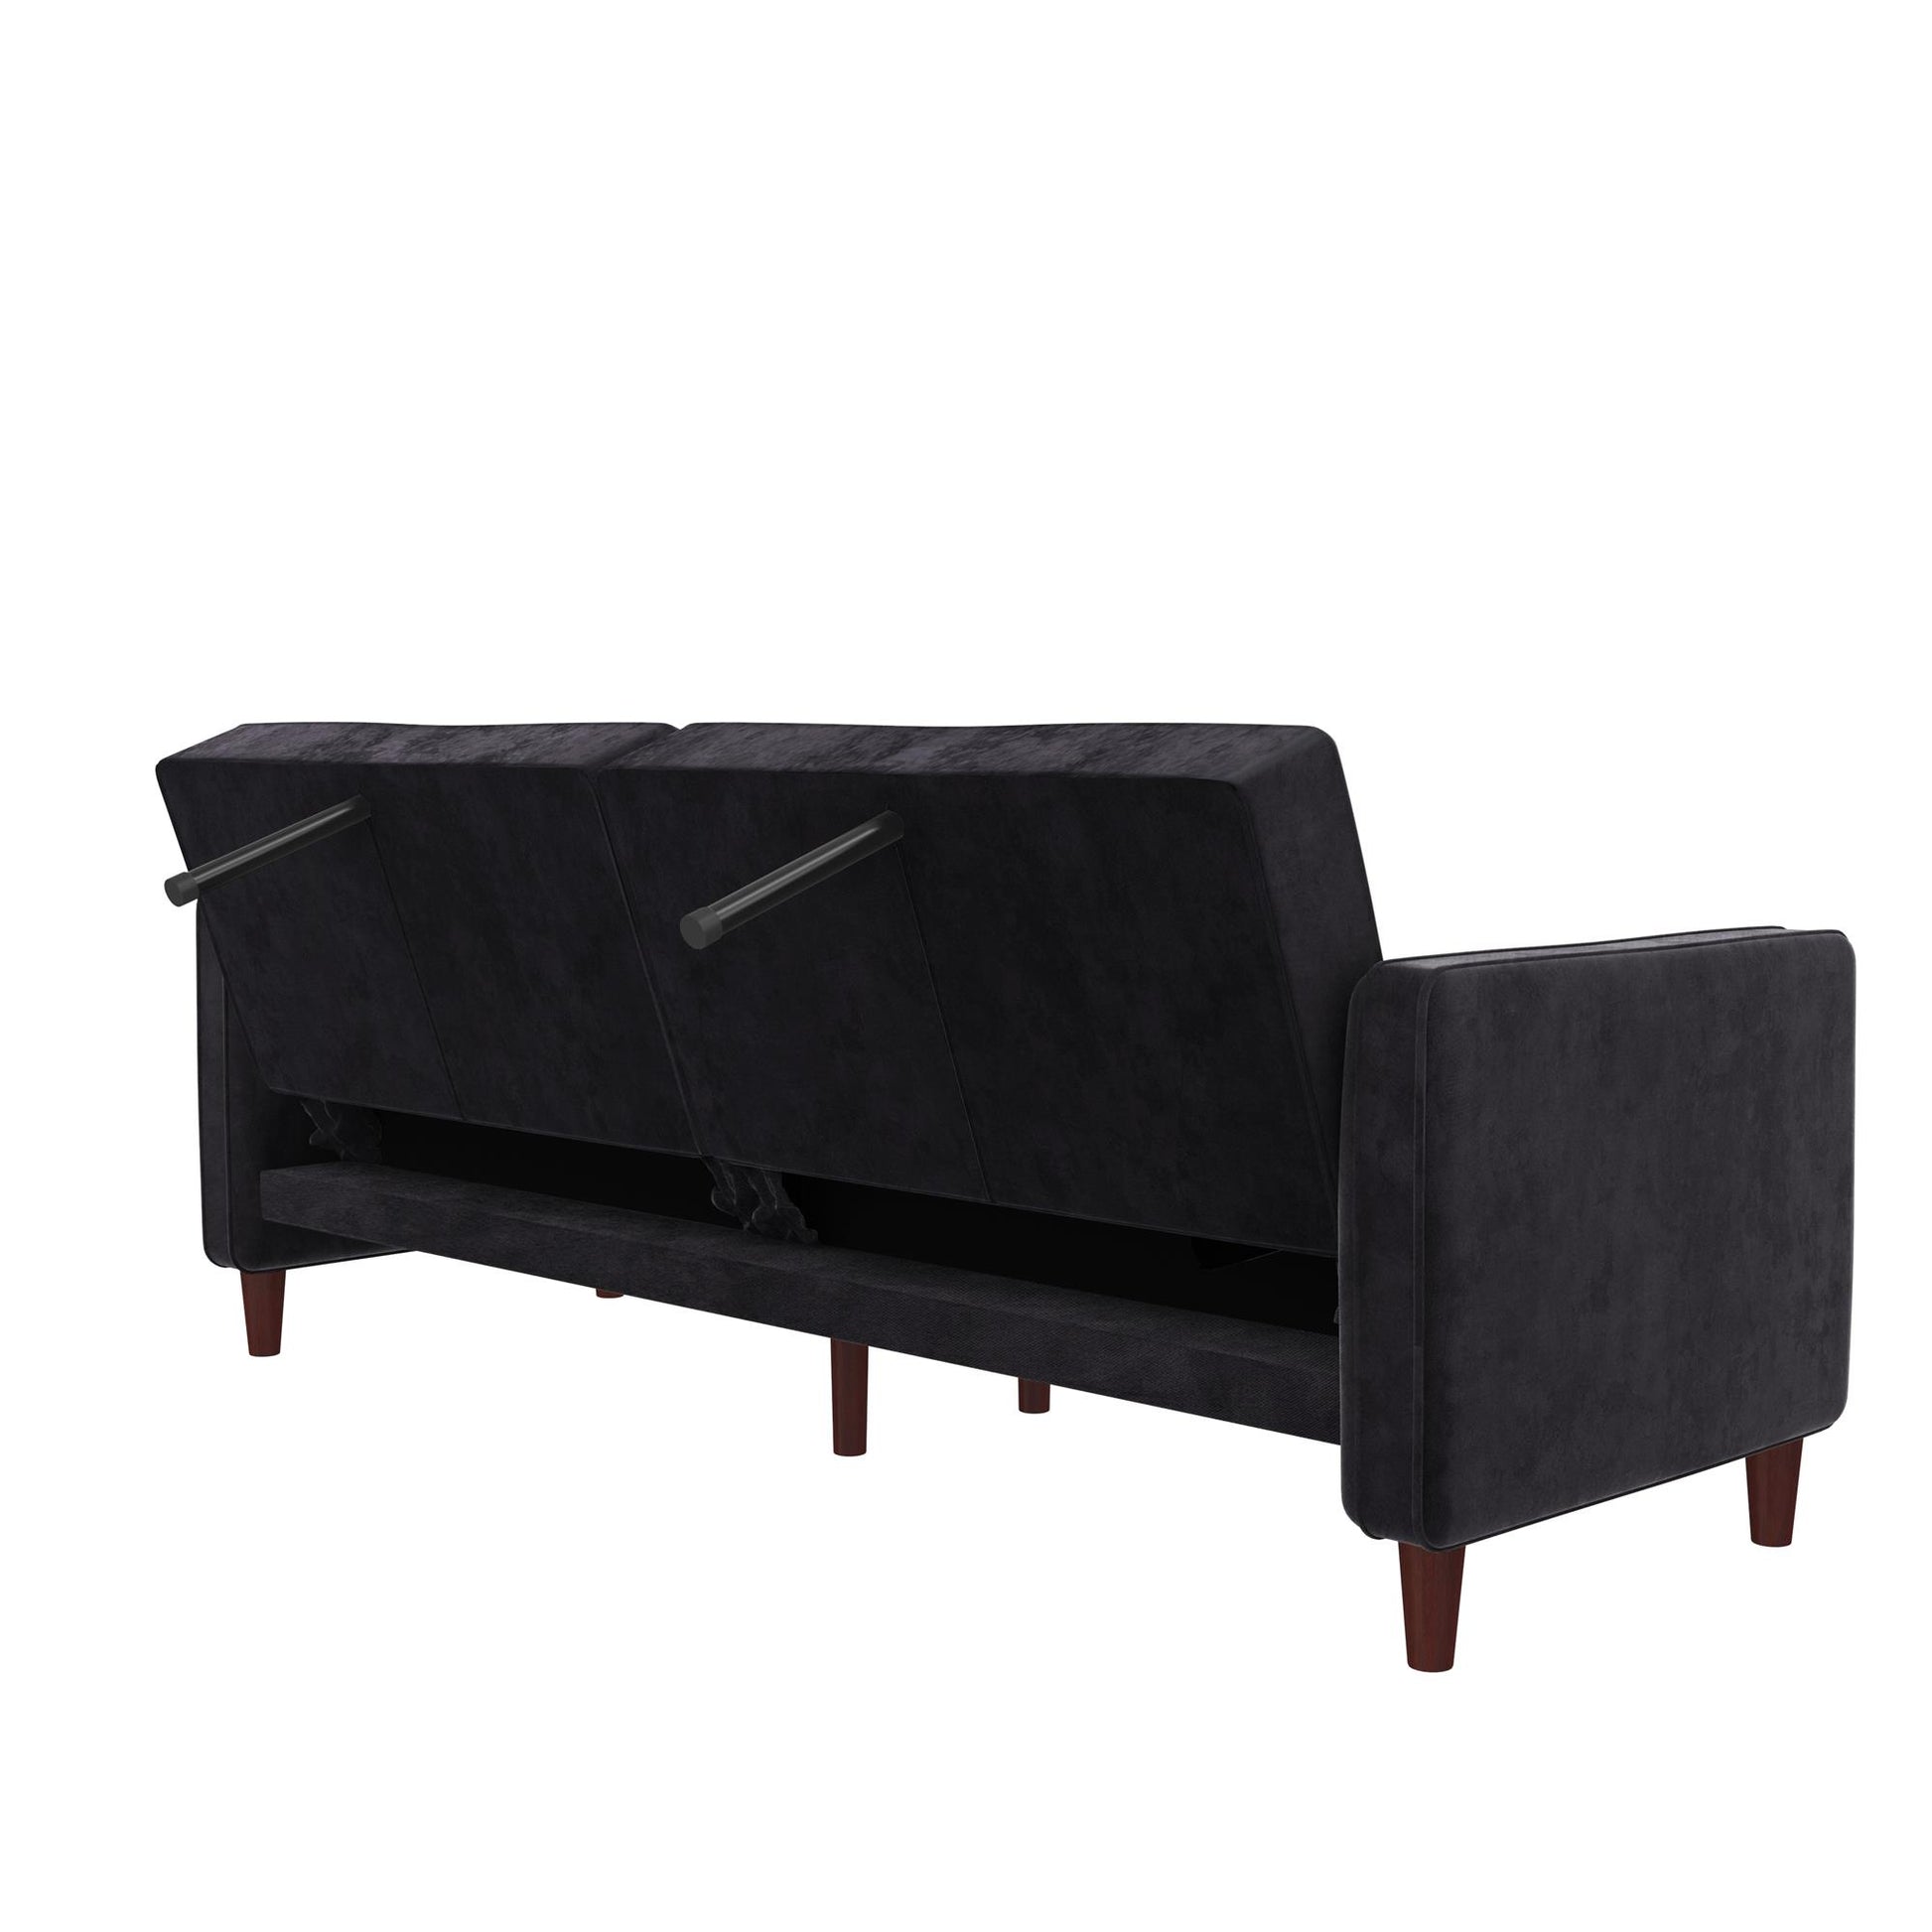 Pin Tufted Transitional Futon with Vertical Stitching and Button Tufting - Black